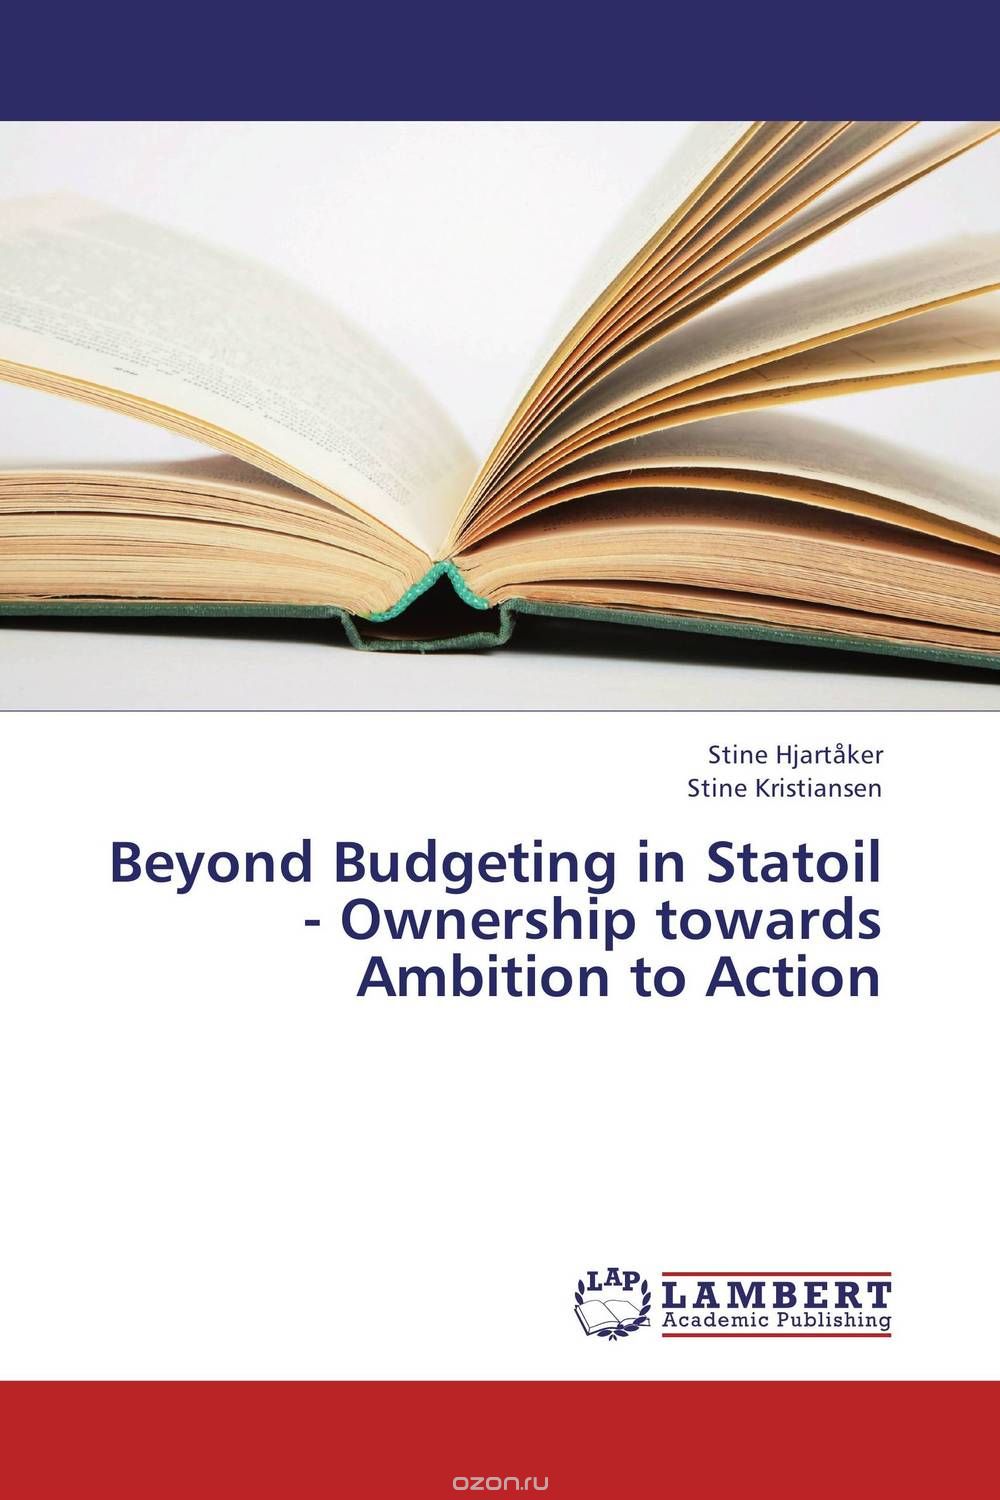 Beyond Budgeting in Statoil - Ownership towards Ambition to Action